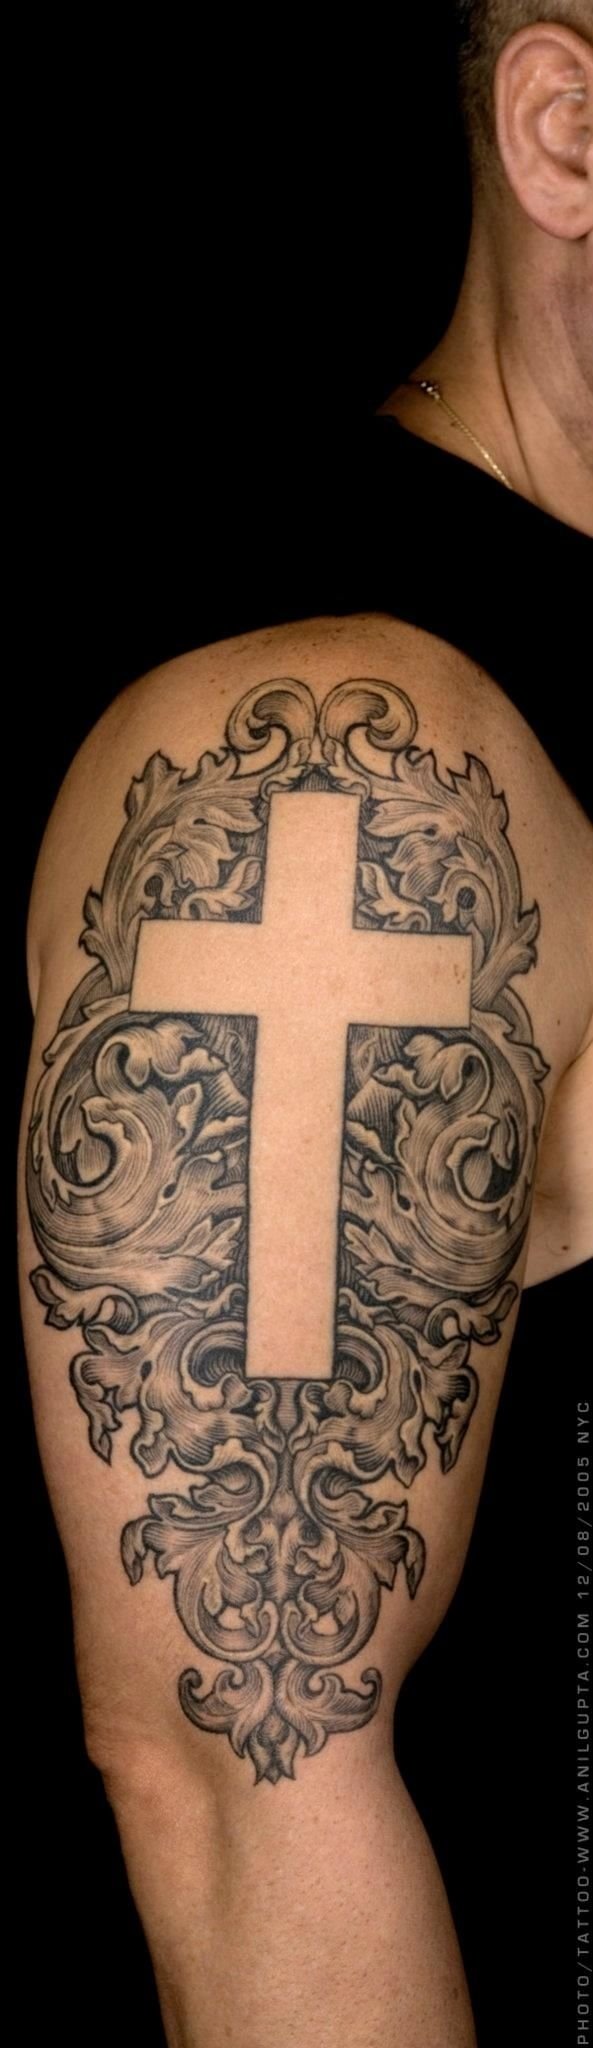 10 Wonderful Awesome Tattoos Ideas For Guys 56 best cross tattoos for men improb 1 2022